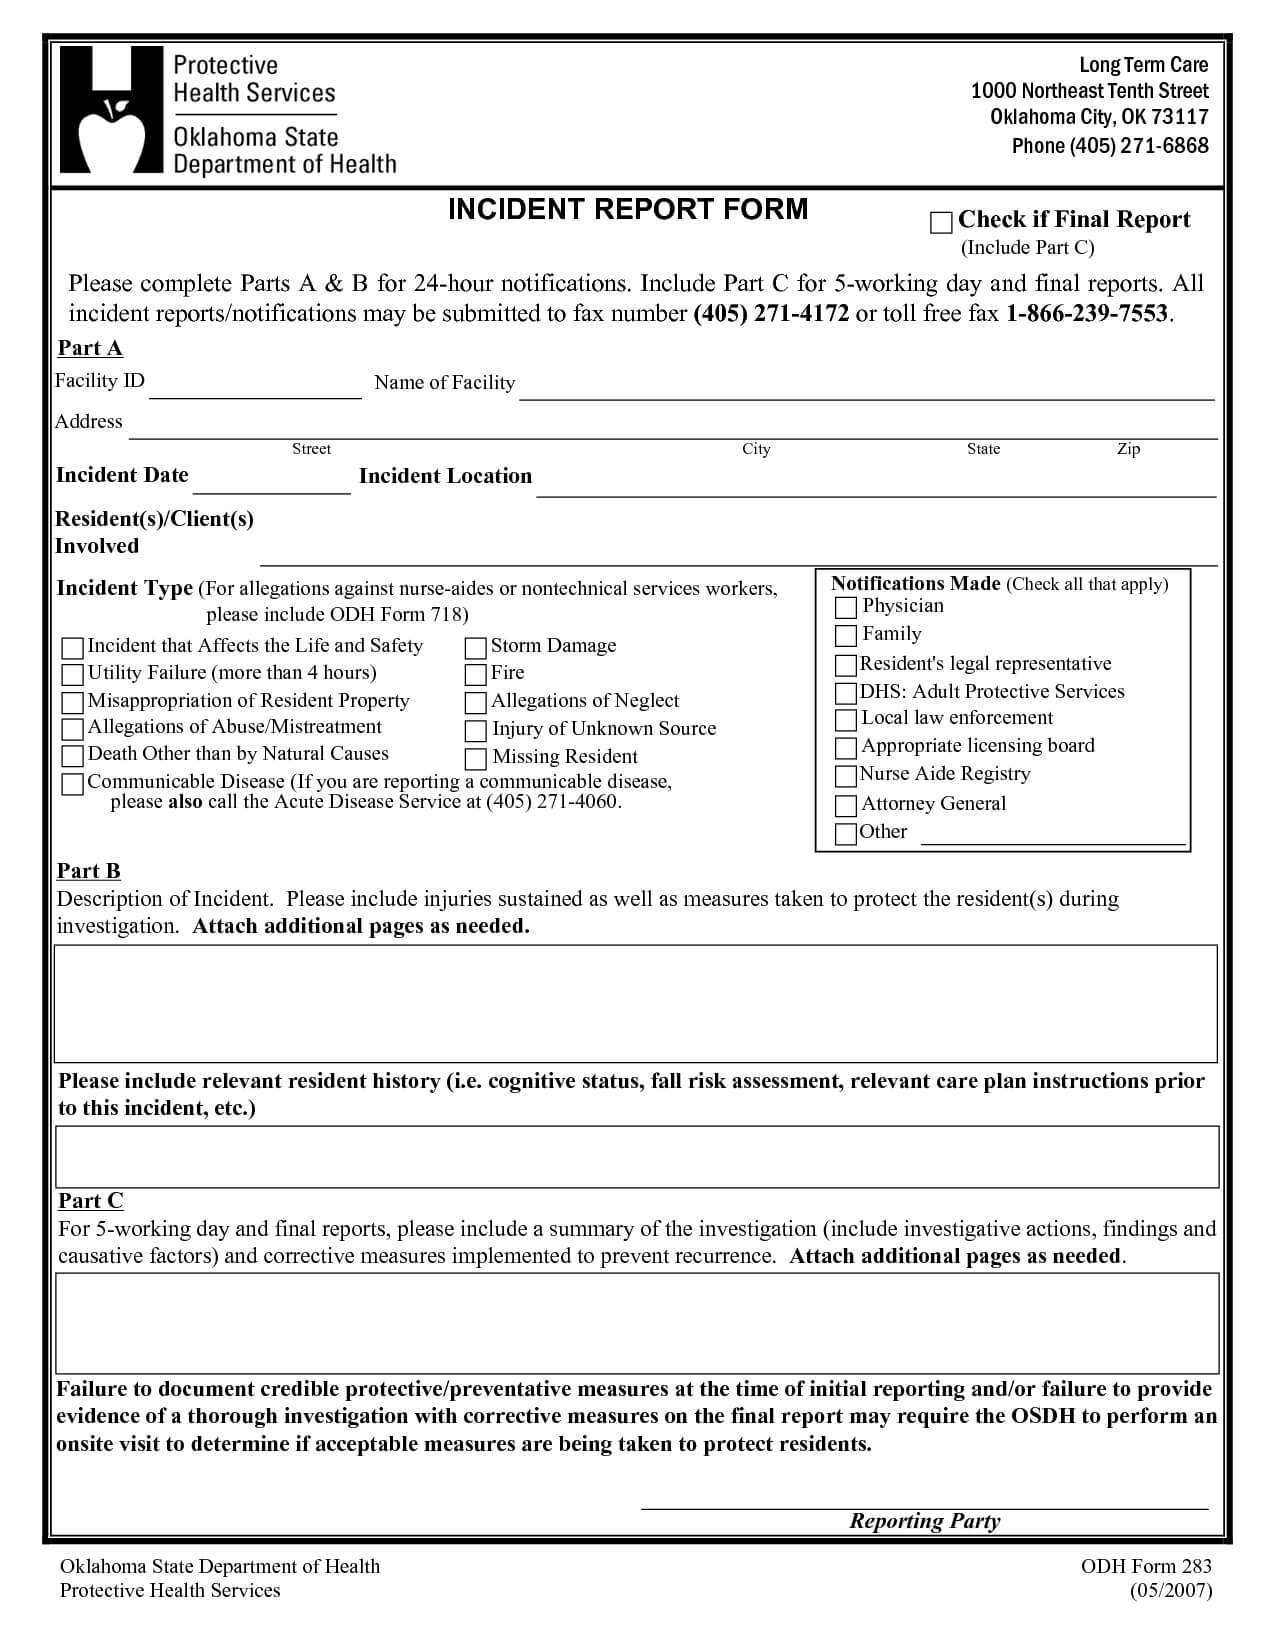 Incident Report Format Letter And Security Guard Incident With Health Check Report Template